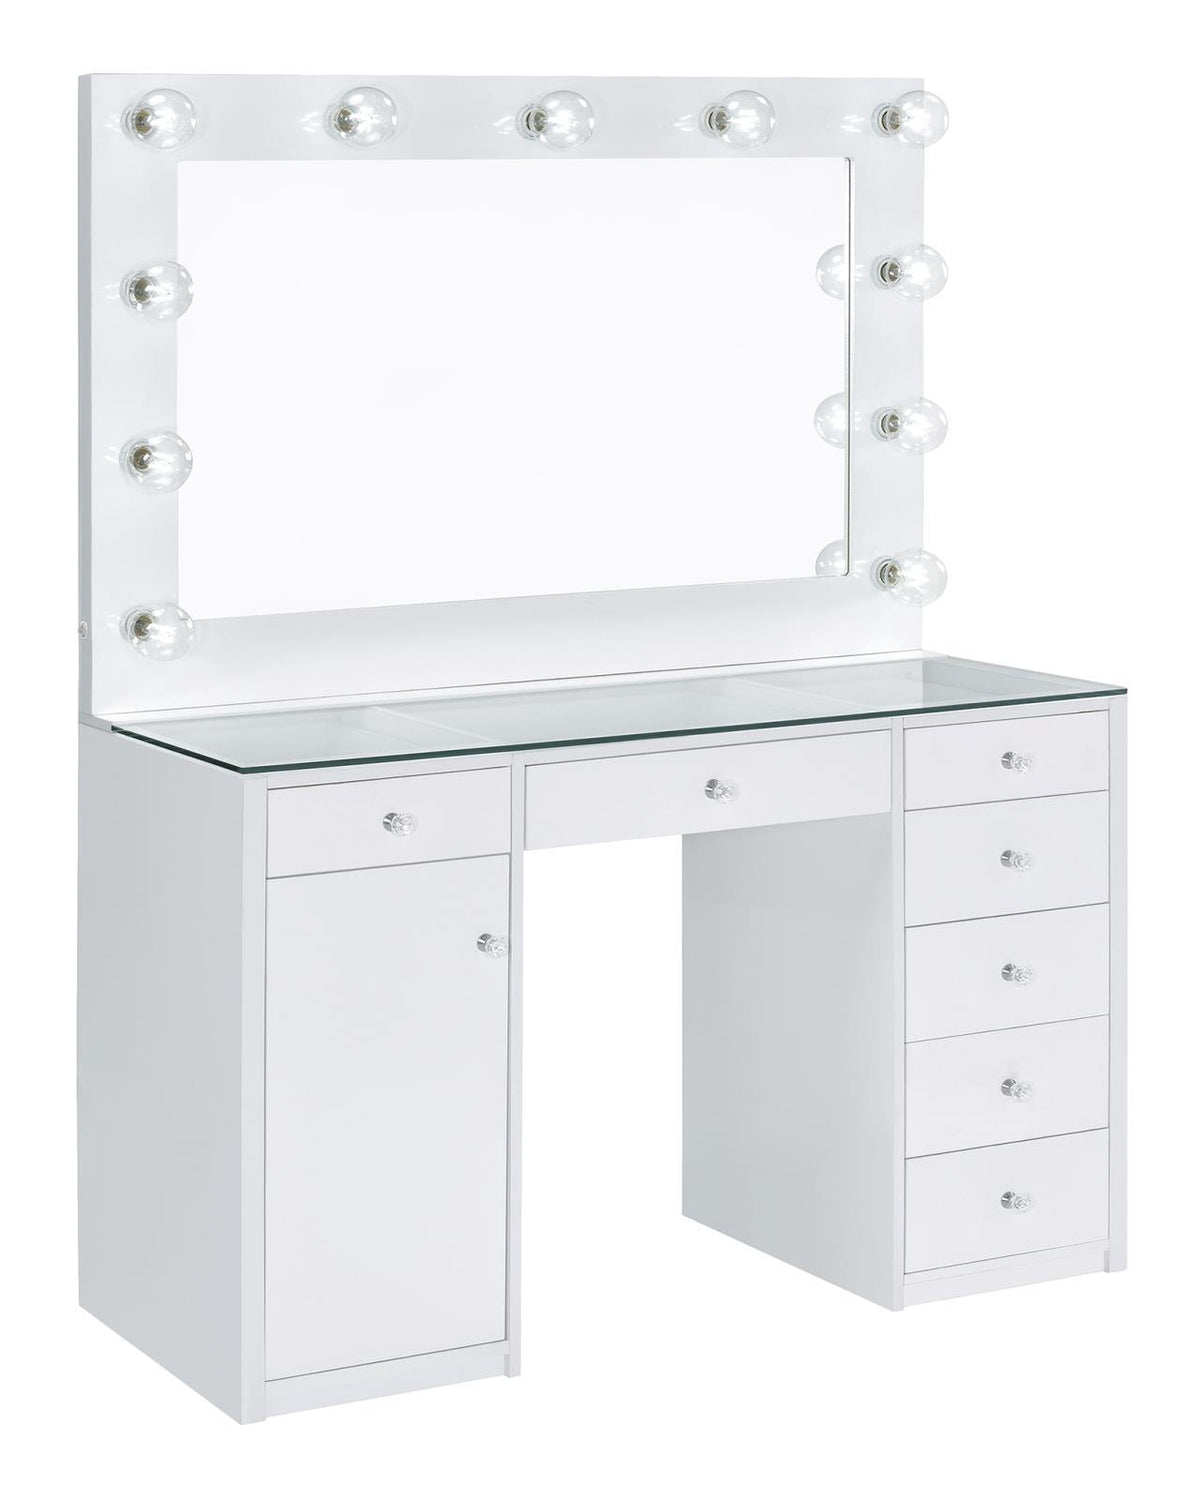 Percy 7-drawer Glass Top Vanity Desk with Lighting White - Half Price Furniture